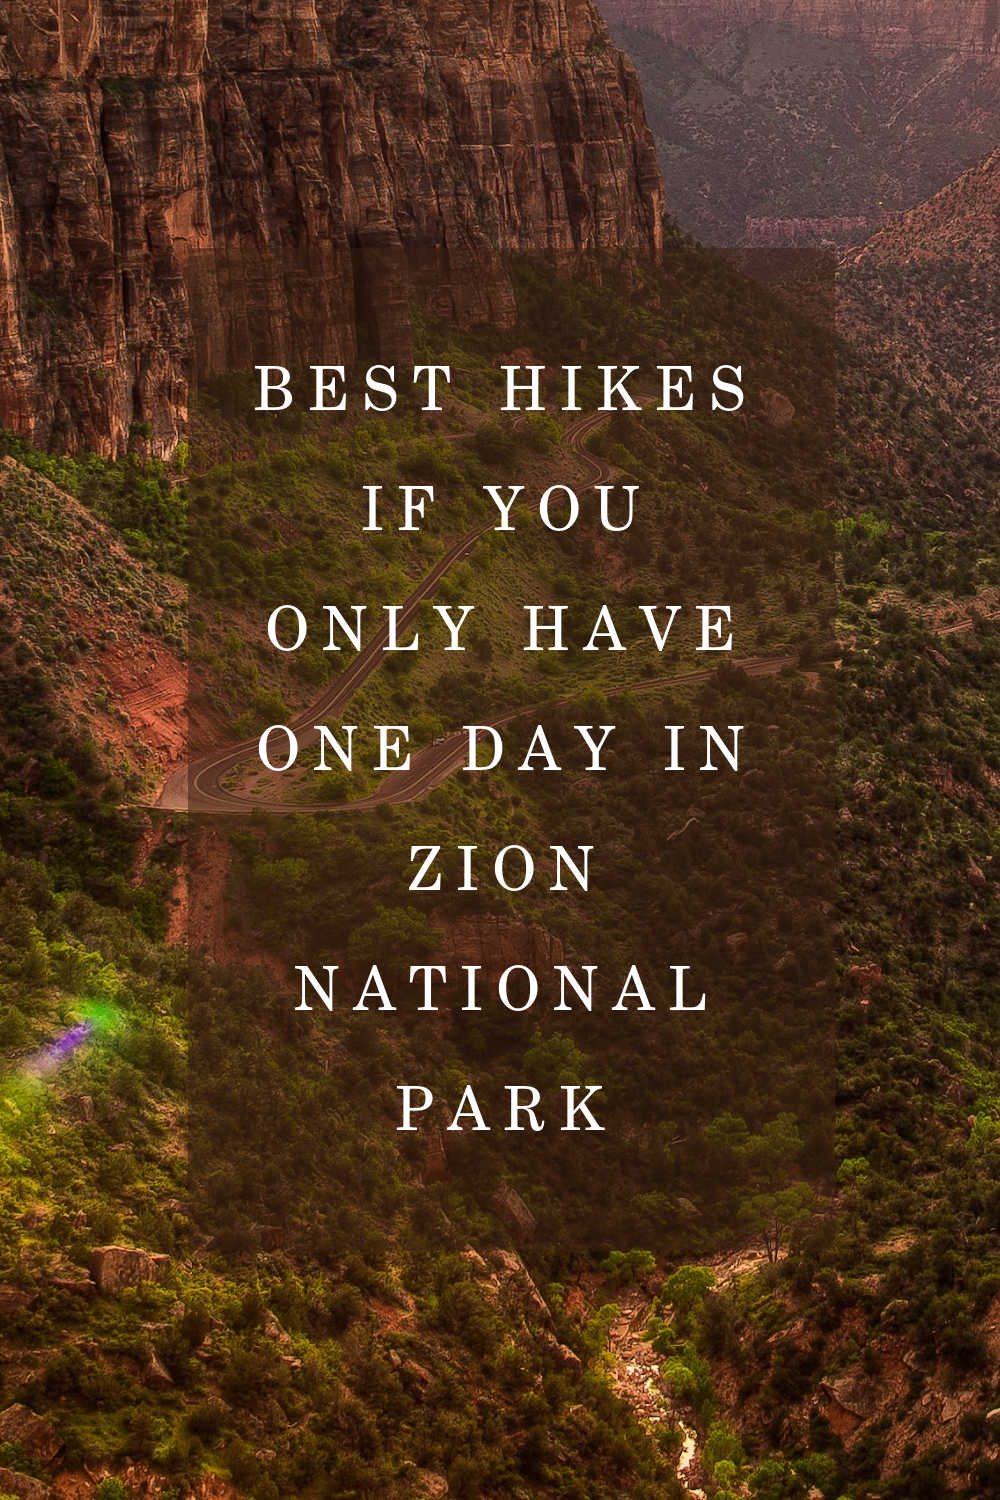 BEST HIKE ONLY ONE DAY ZION NATIONAL PARK